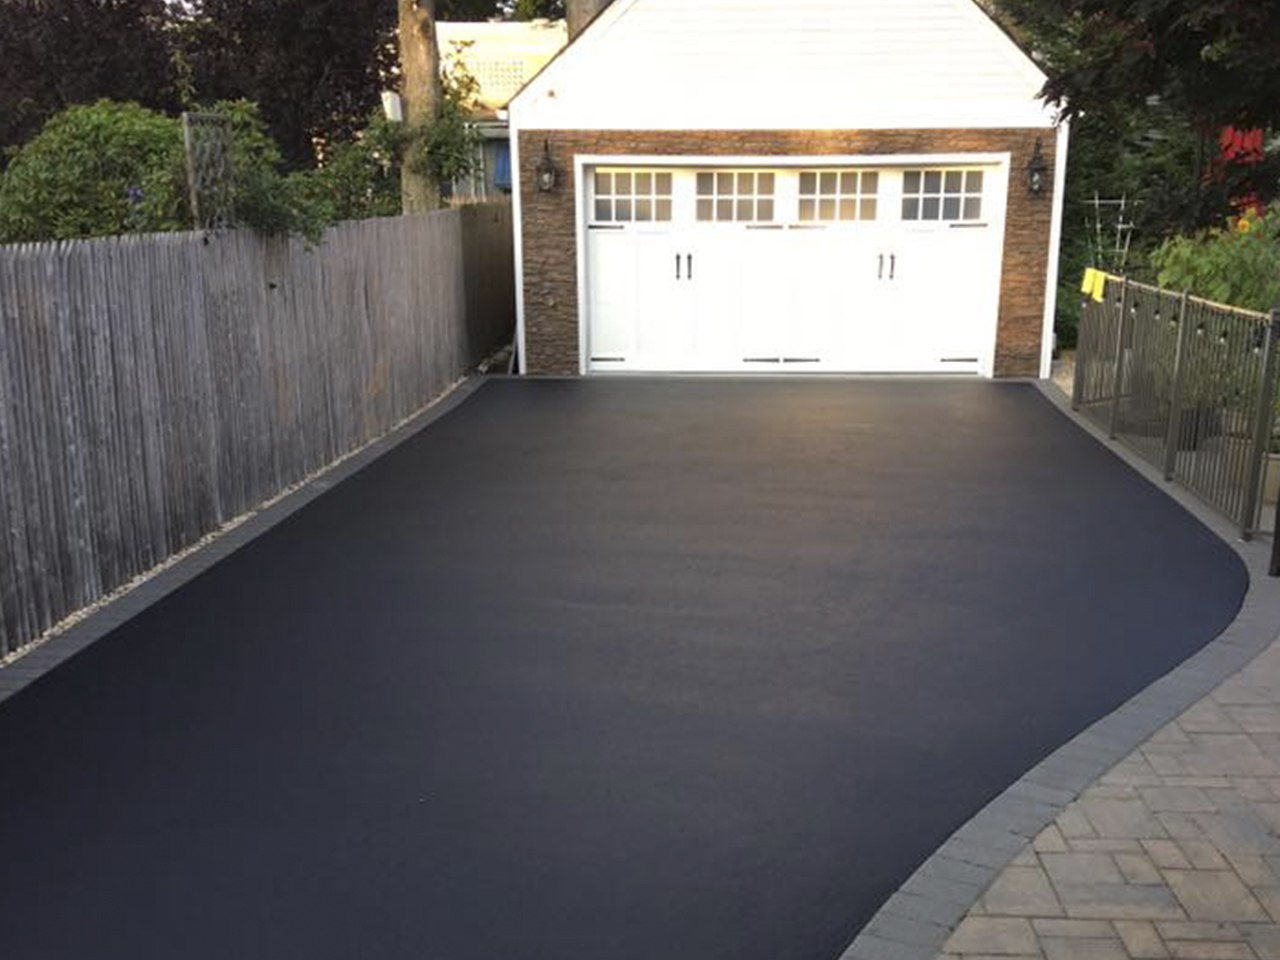 An impeccably paved driveway by Affordable Patio, enhancing the property's exterior appeal